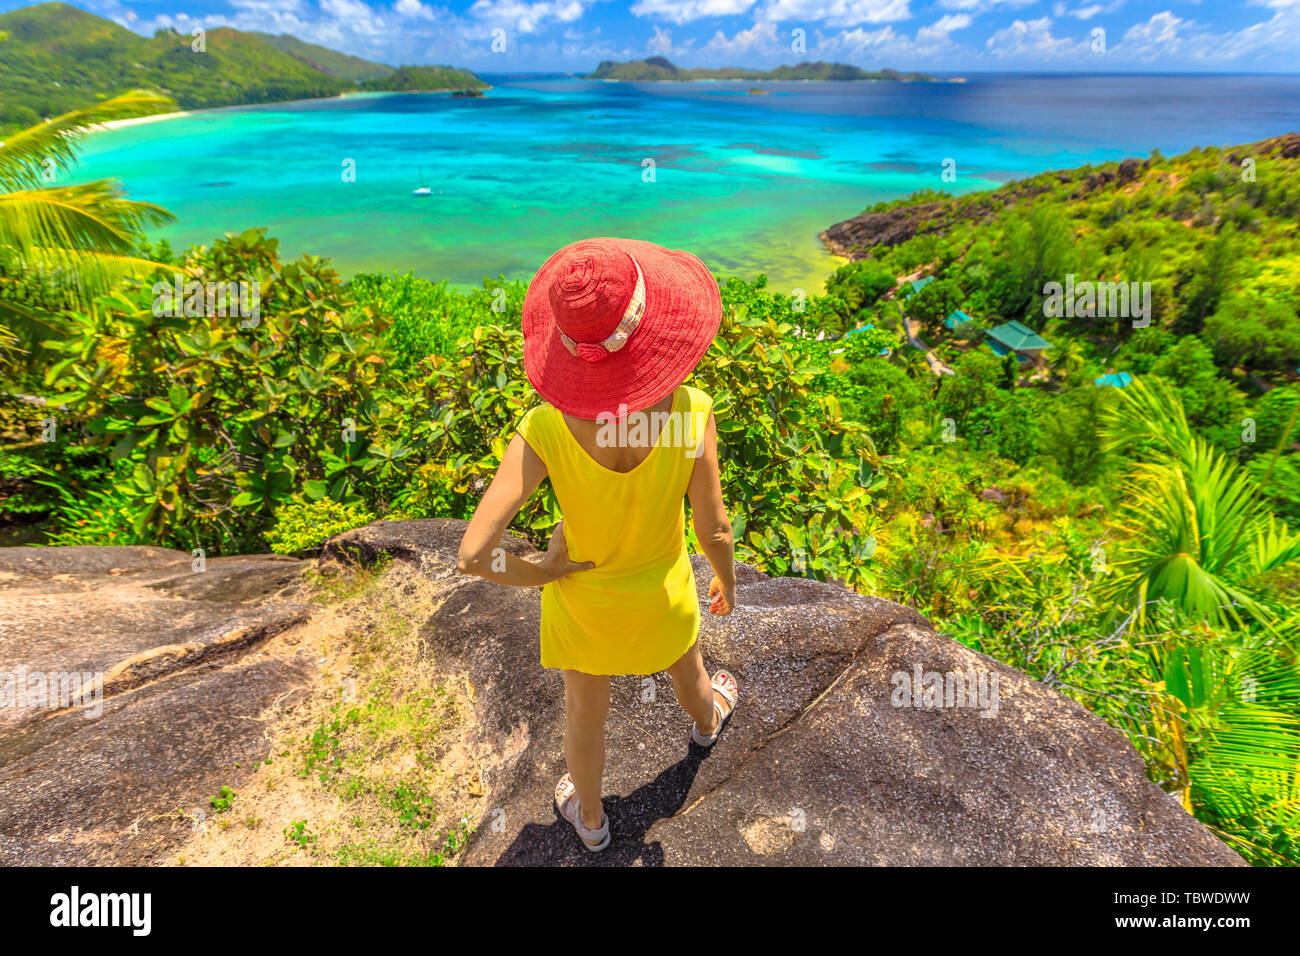 Tropical luxury destination. Lifestyle woman at Anse Gouvernement with turquoise sea, Praslin, Seychelles. Elegant tourist overlooks Cote d Or Bay Stock Photo